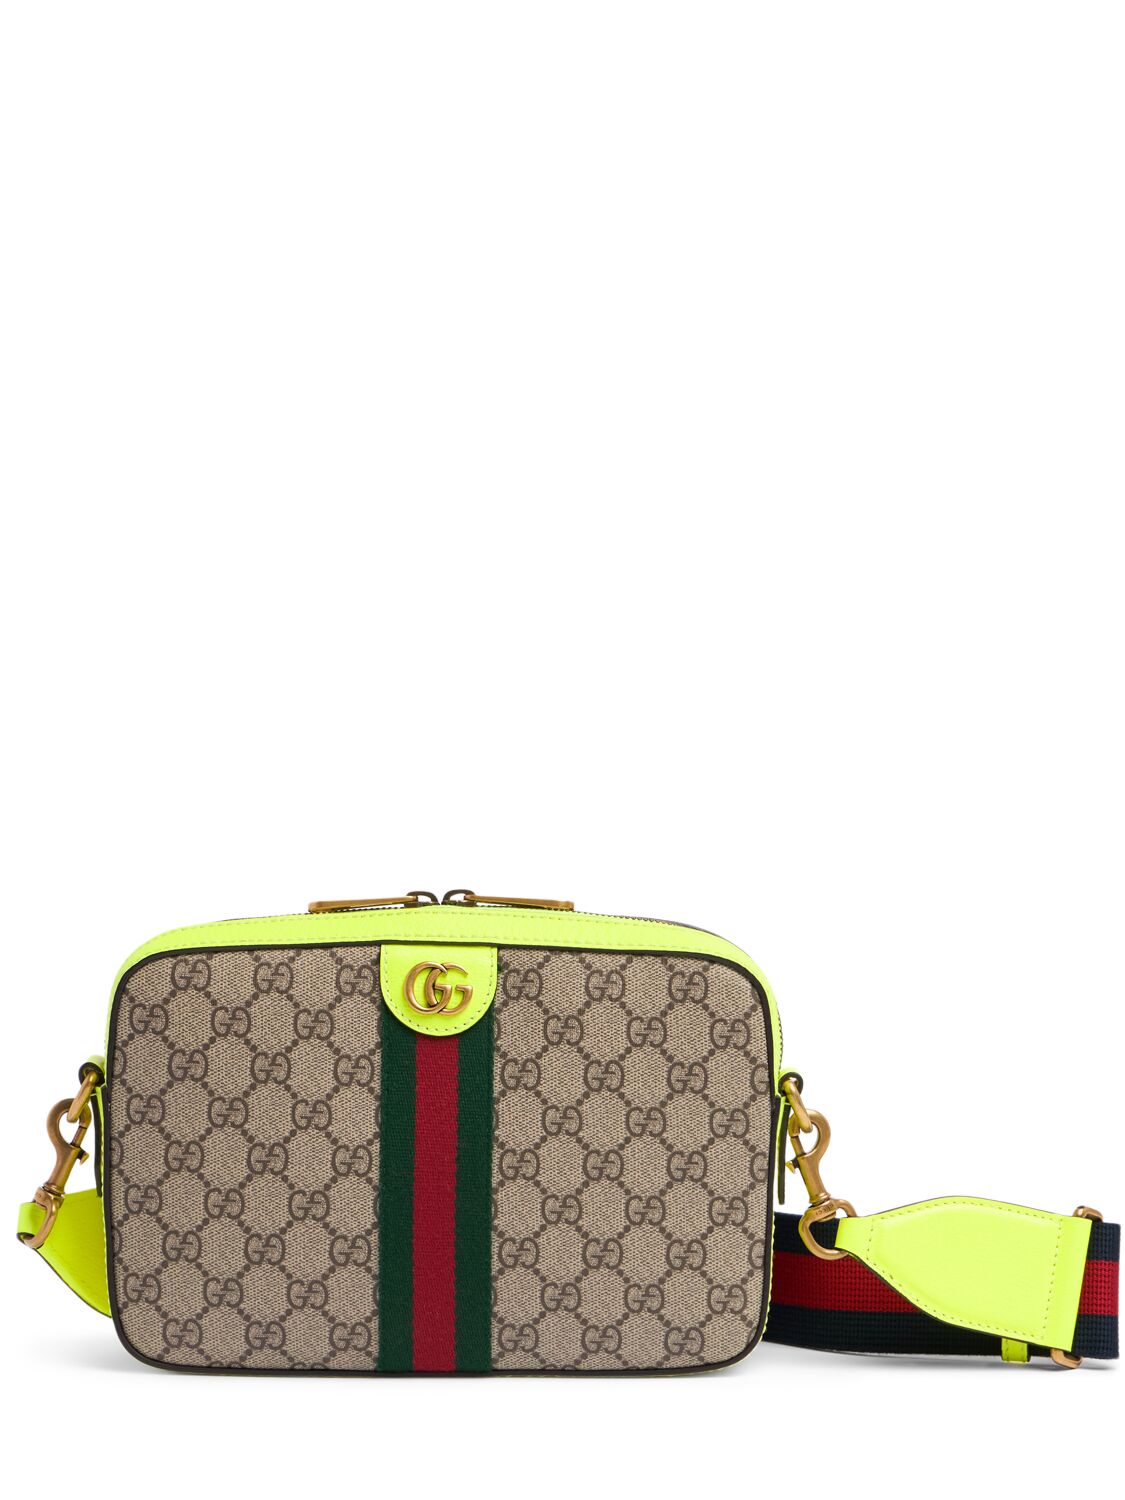 Gucci Ophidia Gg Crossbody Bag In Beige,yellow